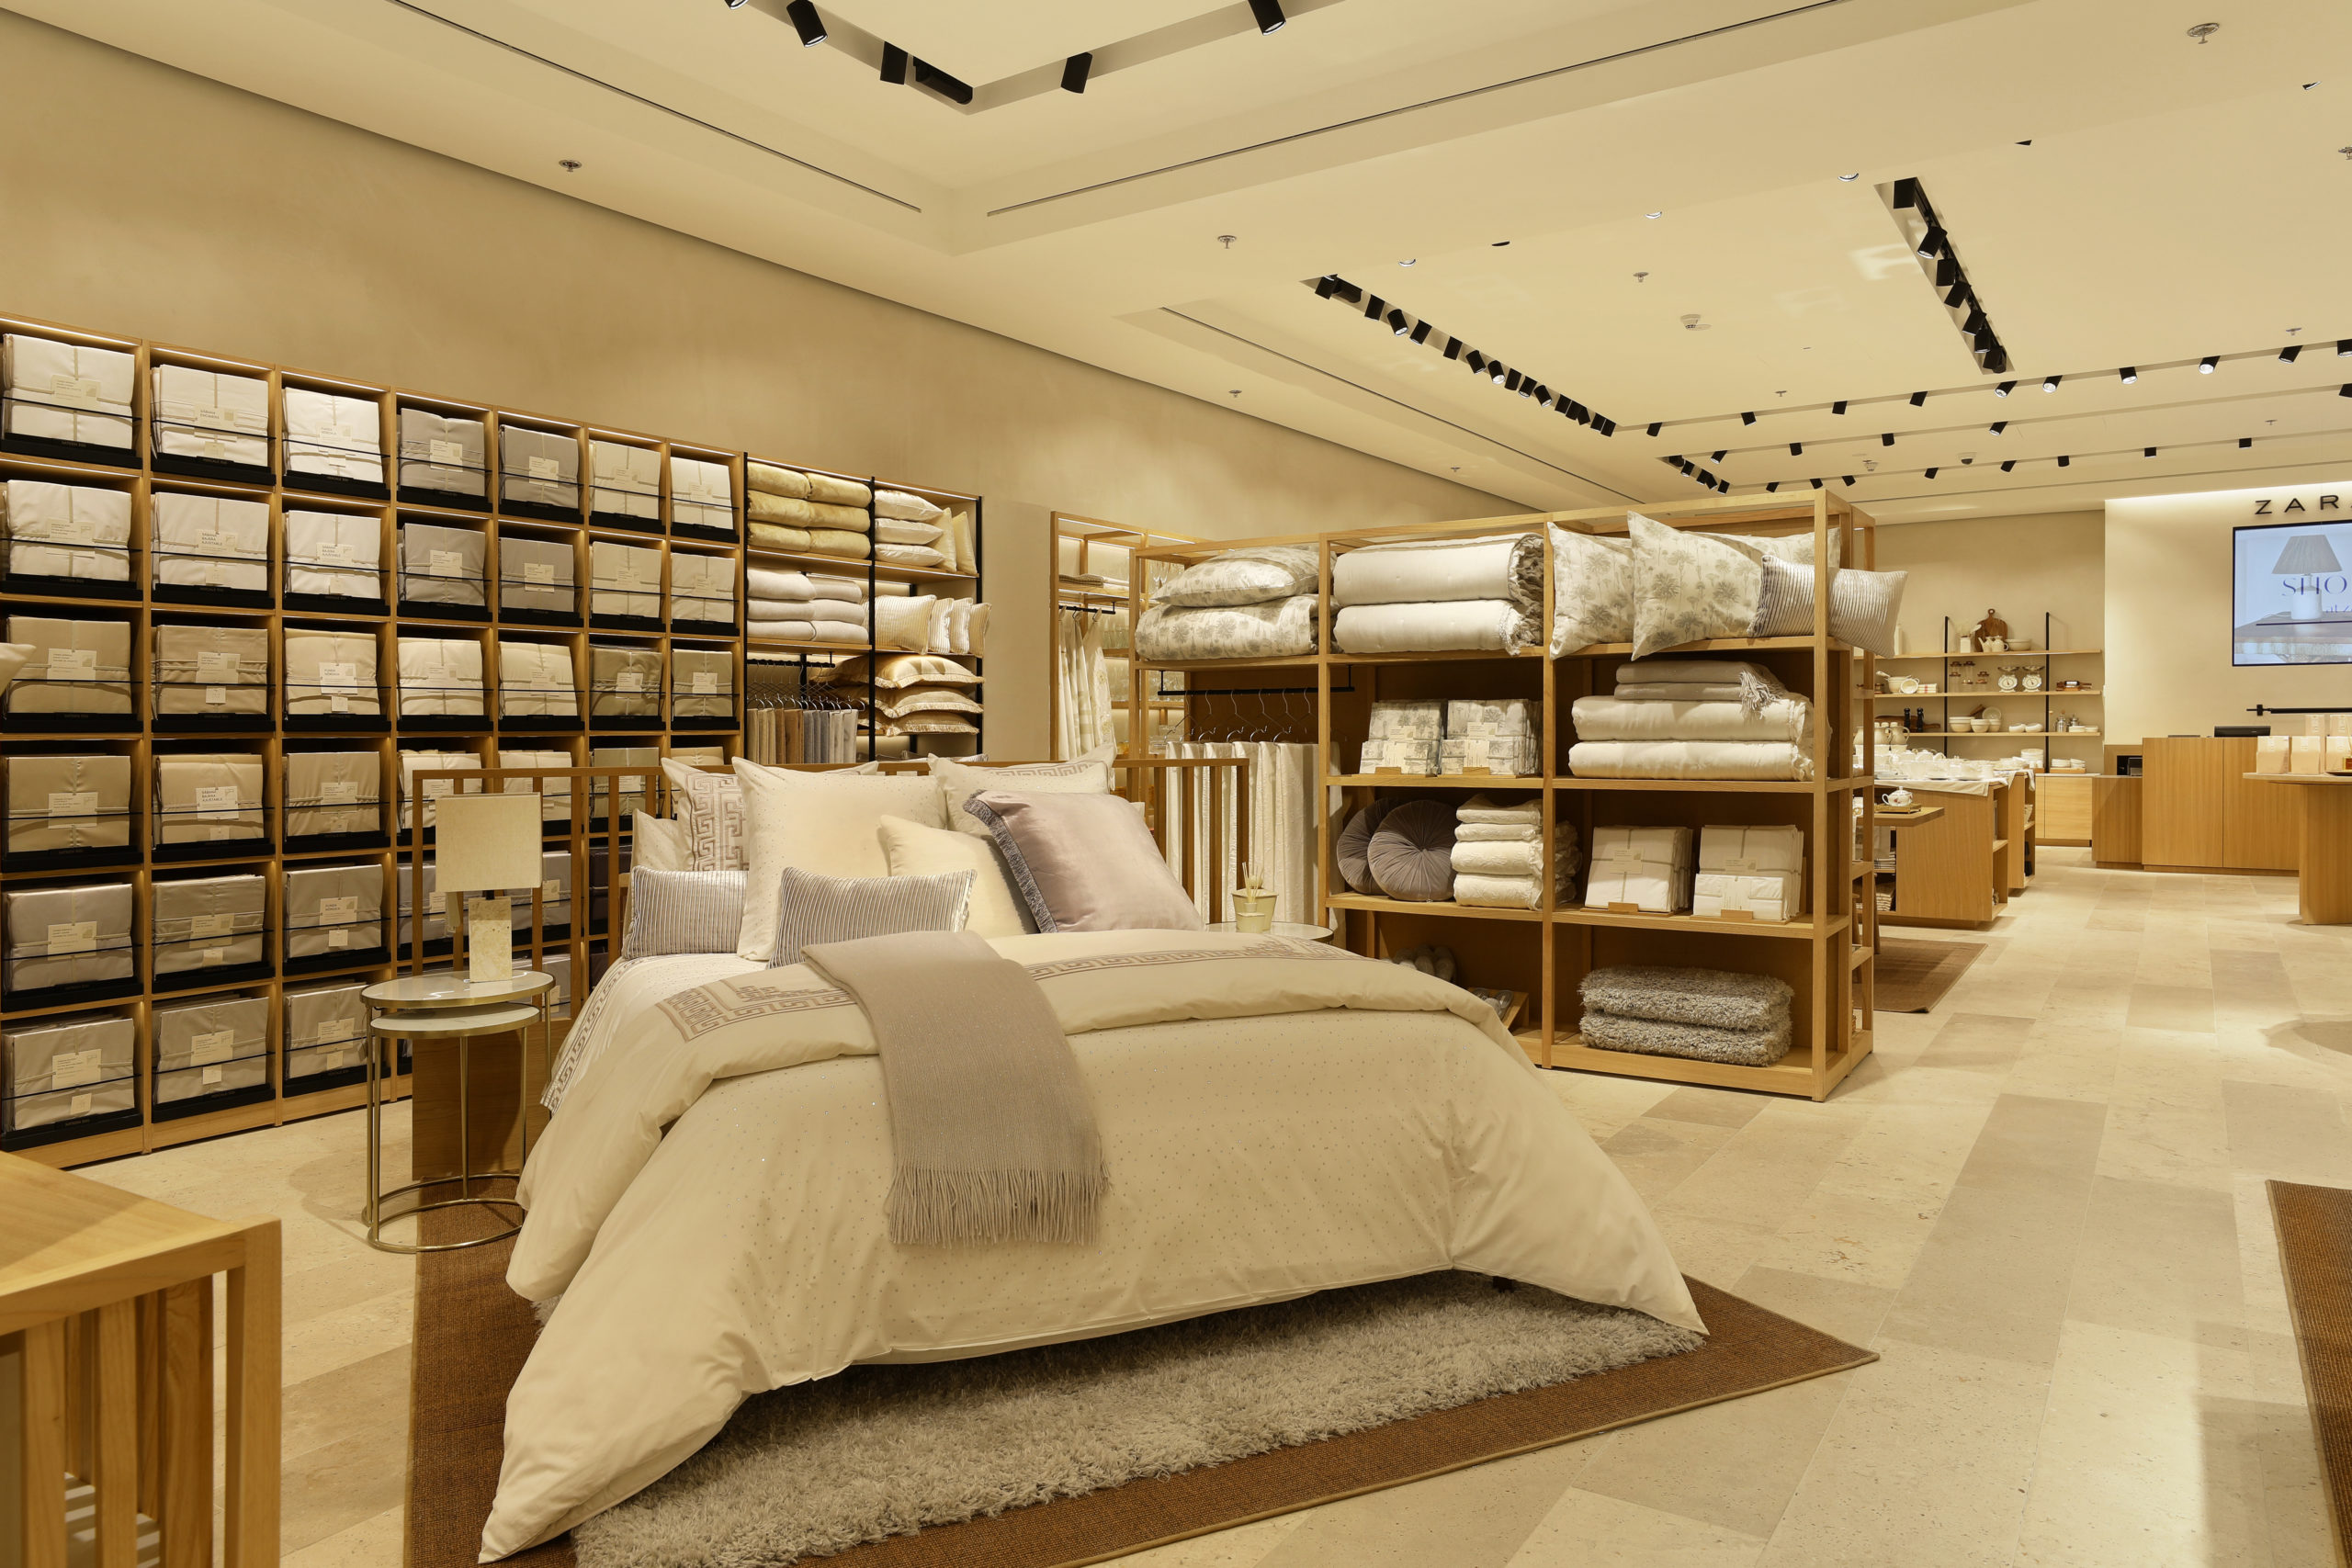 Zara Home opens its new flagship store 